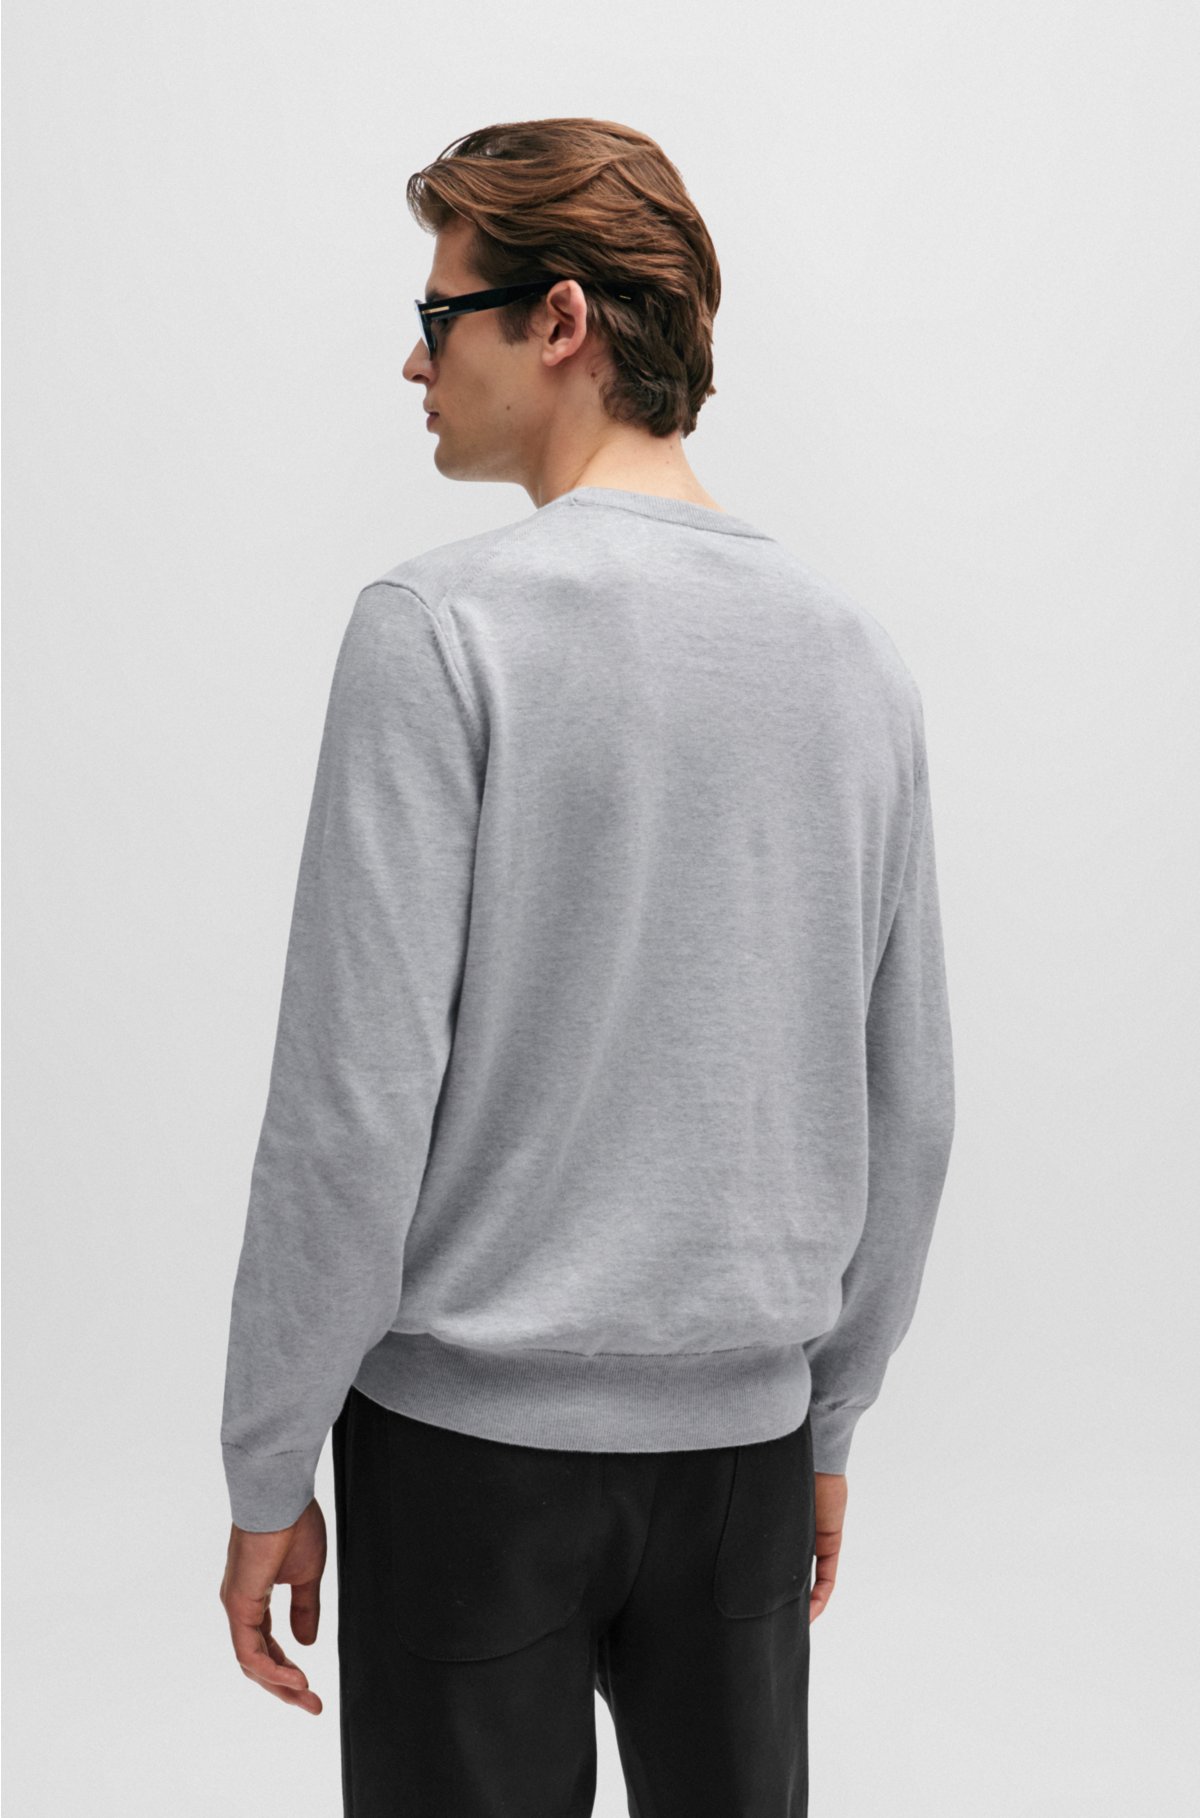 Crew-neck sweater in cotton with embroidered logo, Light Grey